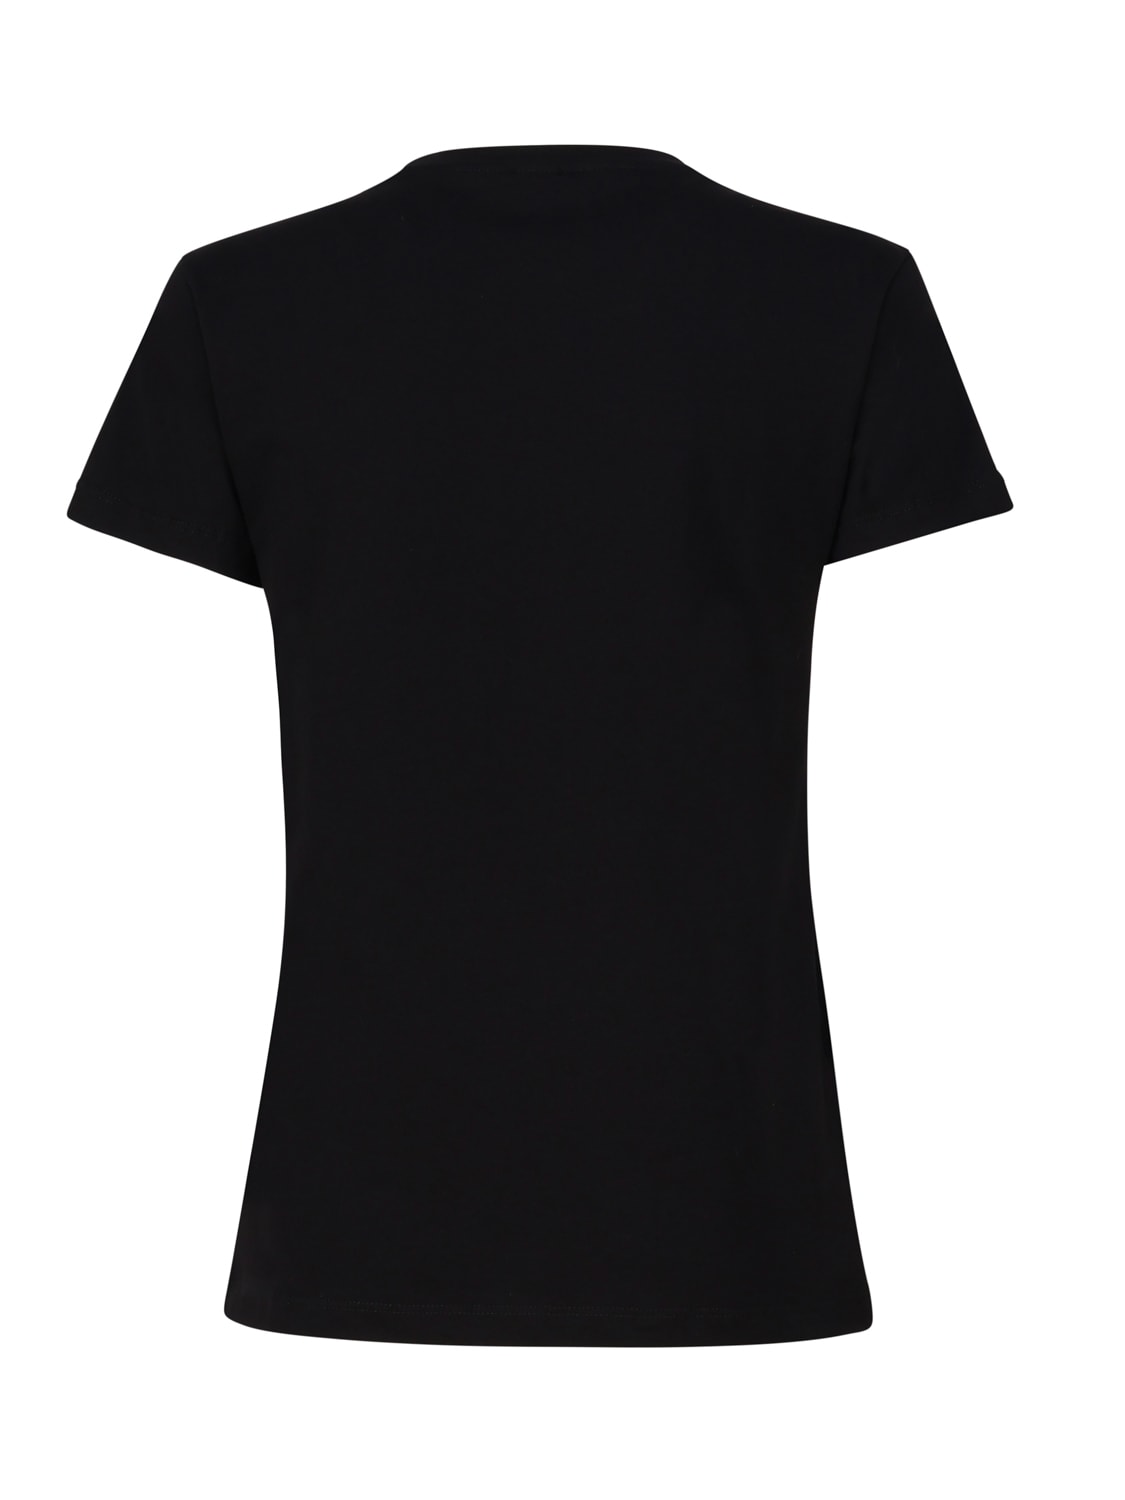 Shop Pinko T-shirt Embroidery Hearts In Black